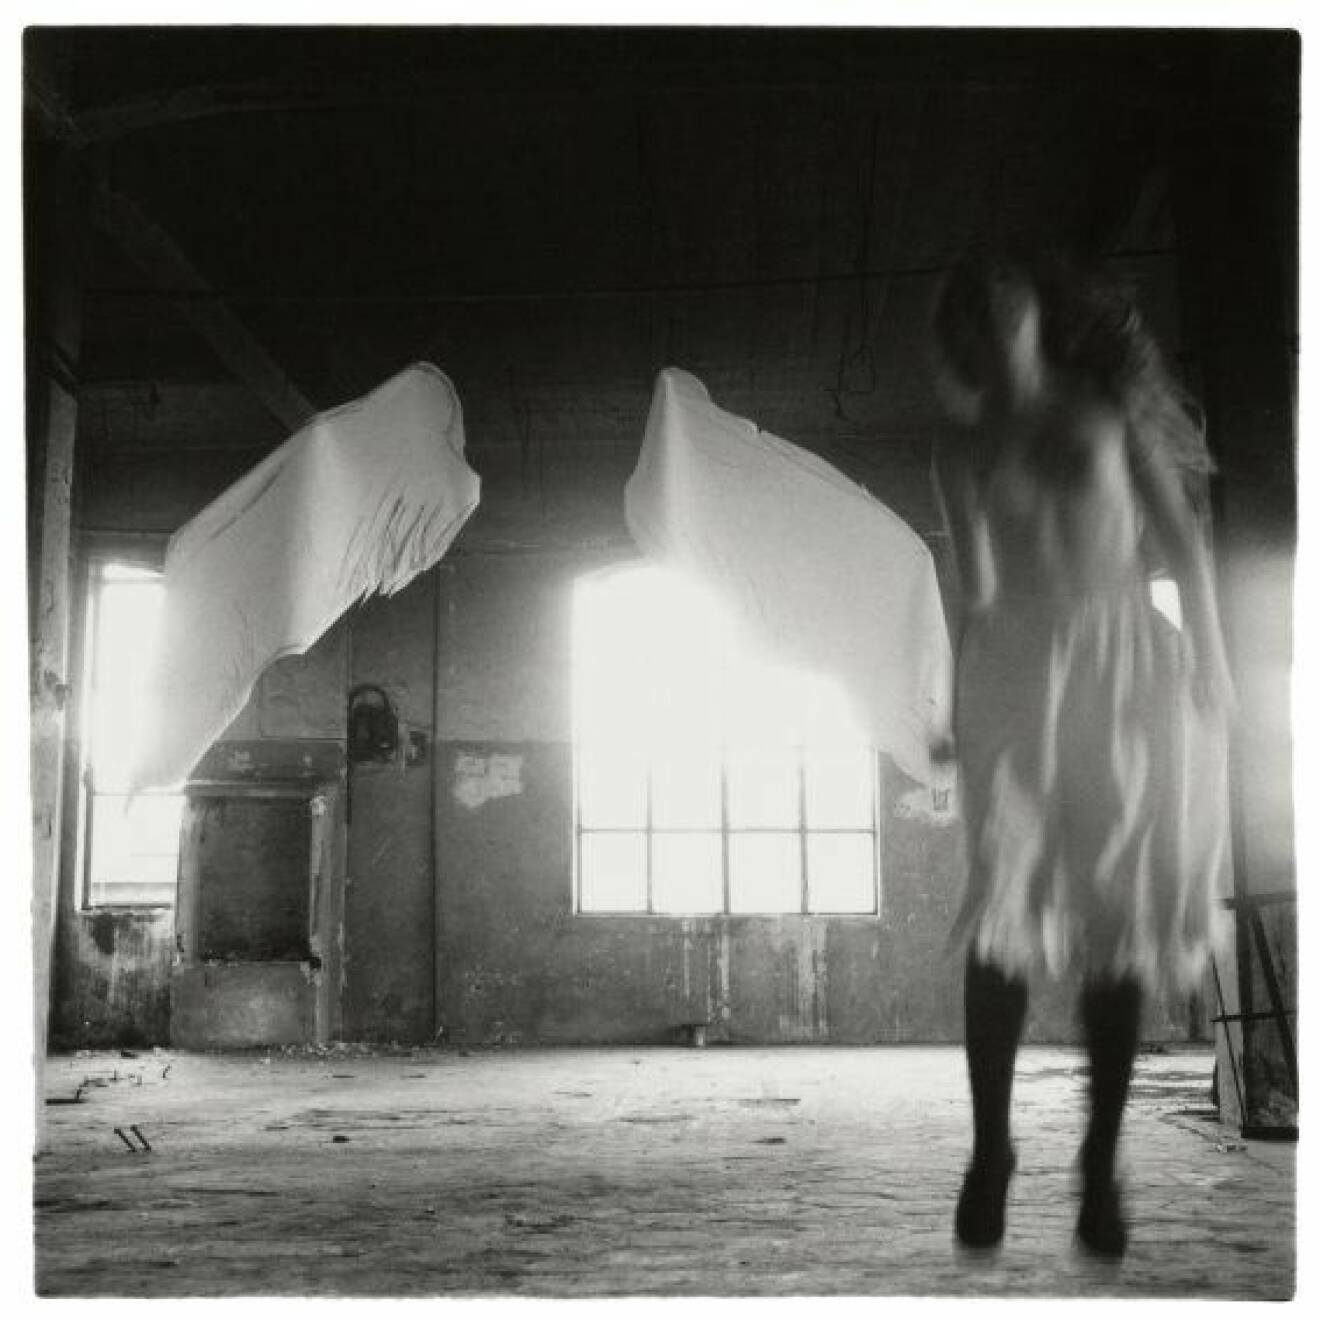 Francesca Woodman, From Angel series, Rome, Italy, 1977 © George and Betty Woodman NB: No toning, cropping, enlarging, or overprinting with text allowed.